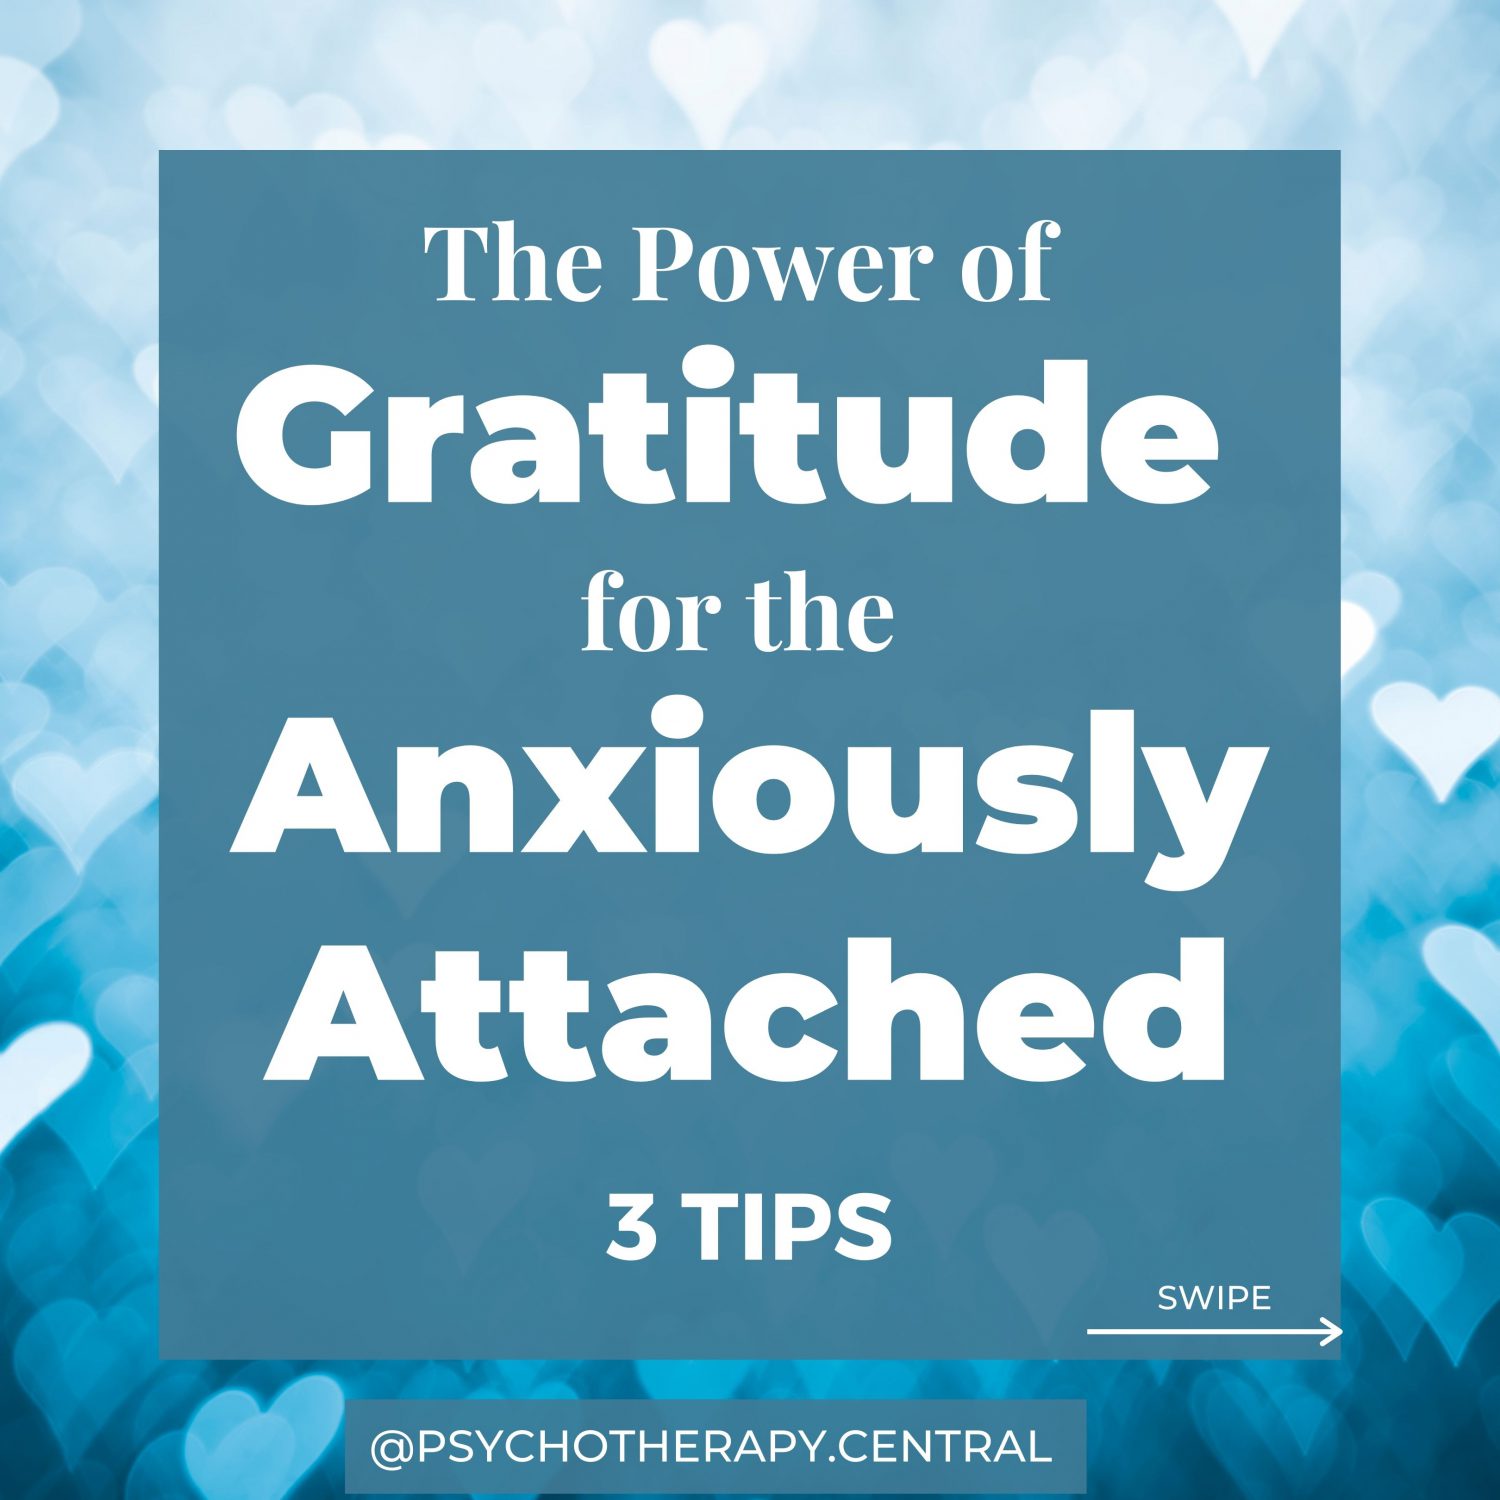 The Power of Gratitude for the Anxiously Attached - 3 tips